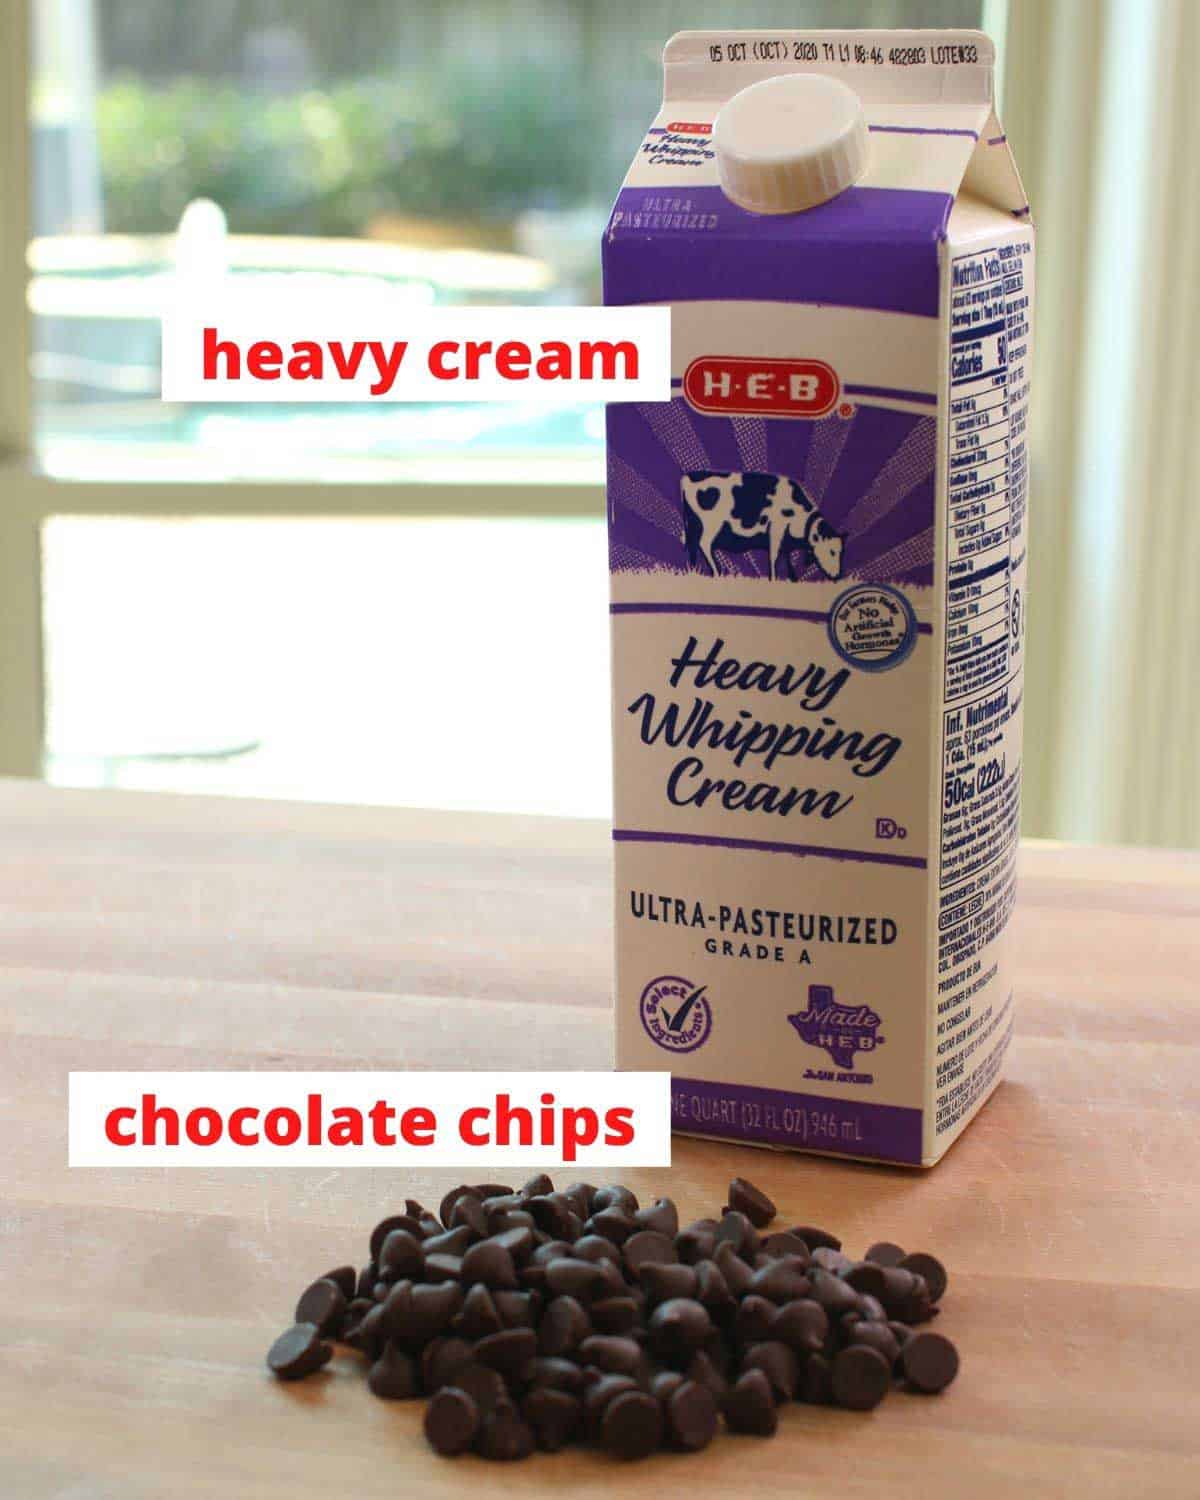 chocolate chips and a carton of heavy cream on a brown cutting board.